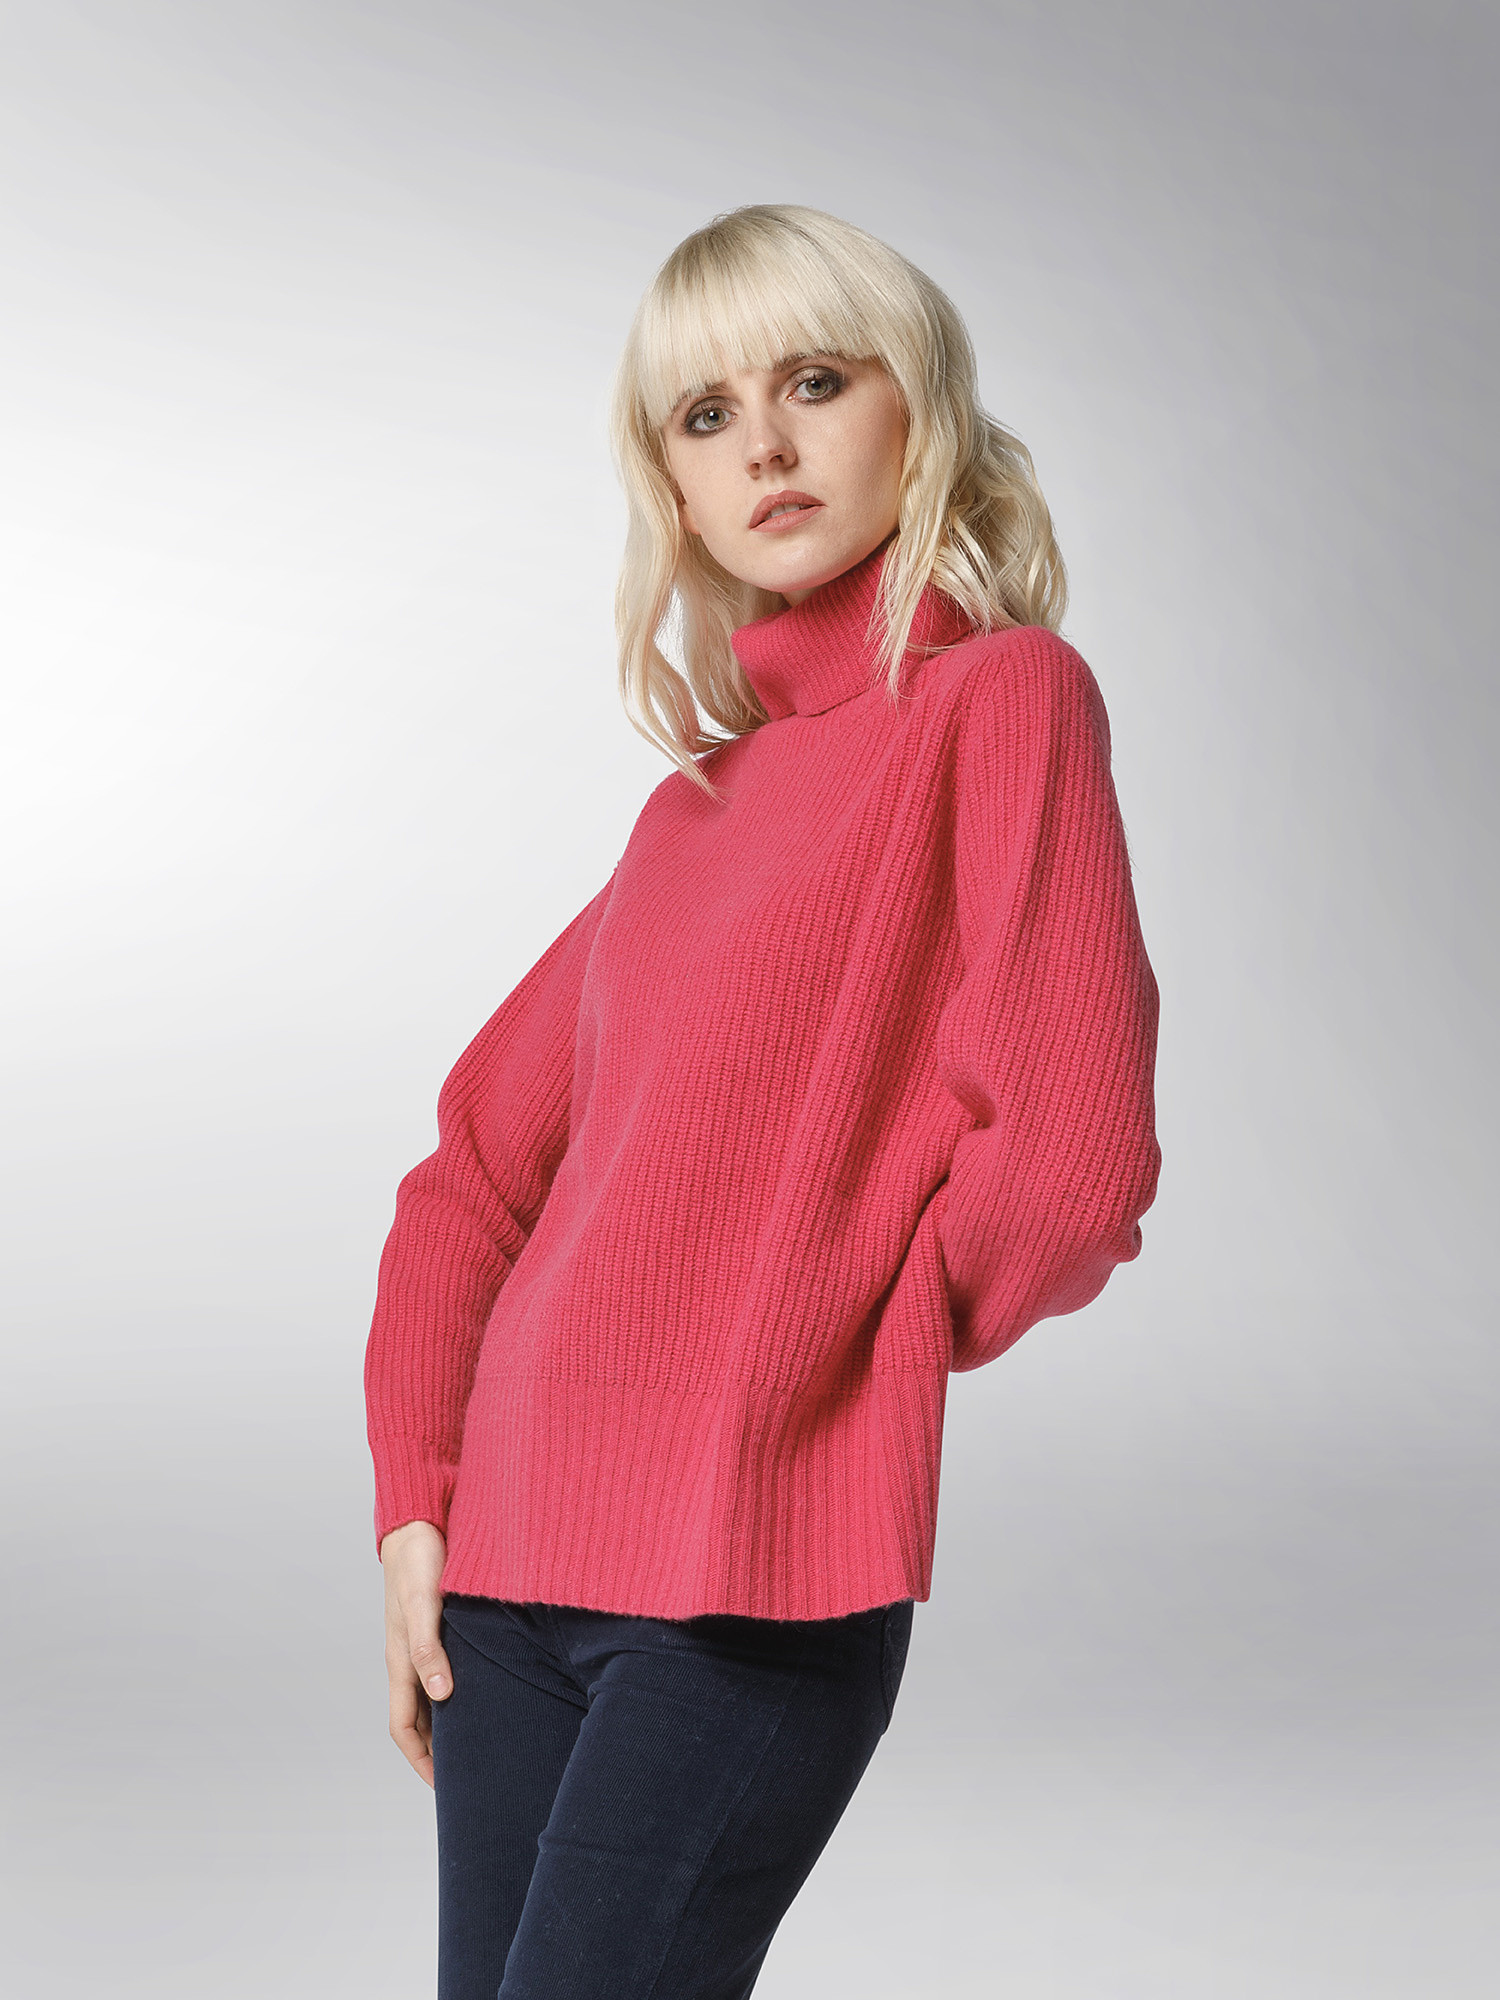 K Collection - Pullover dolcevita in lana cardata, Rosa fuxia, large image number 3